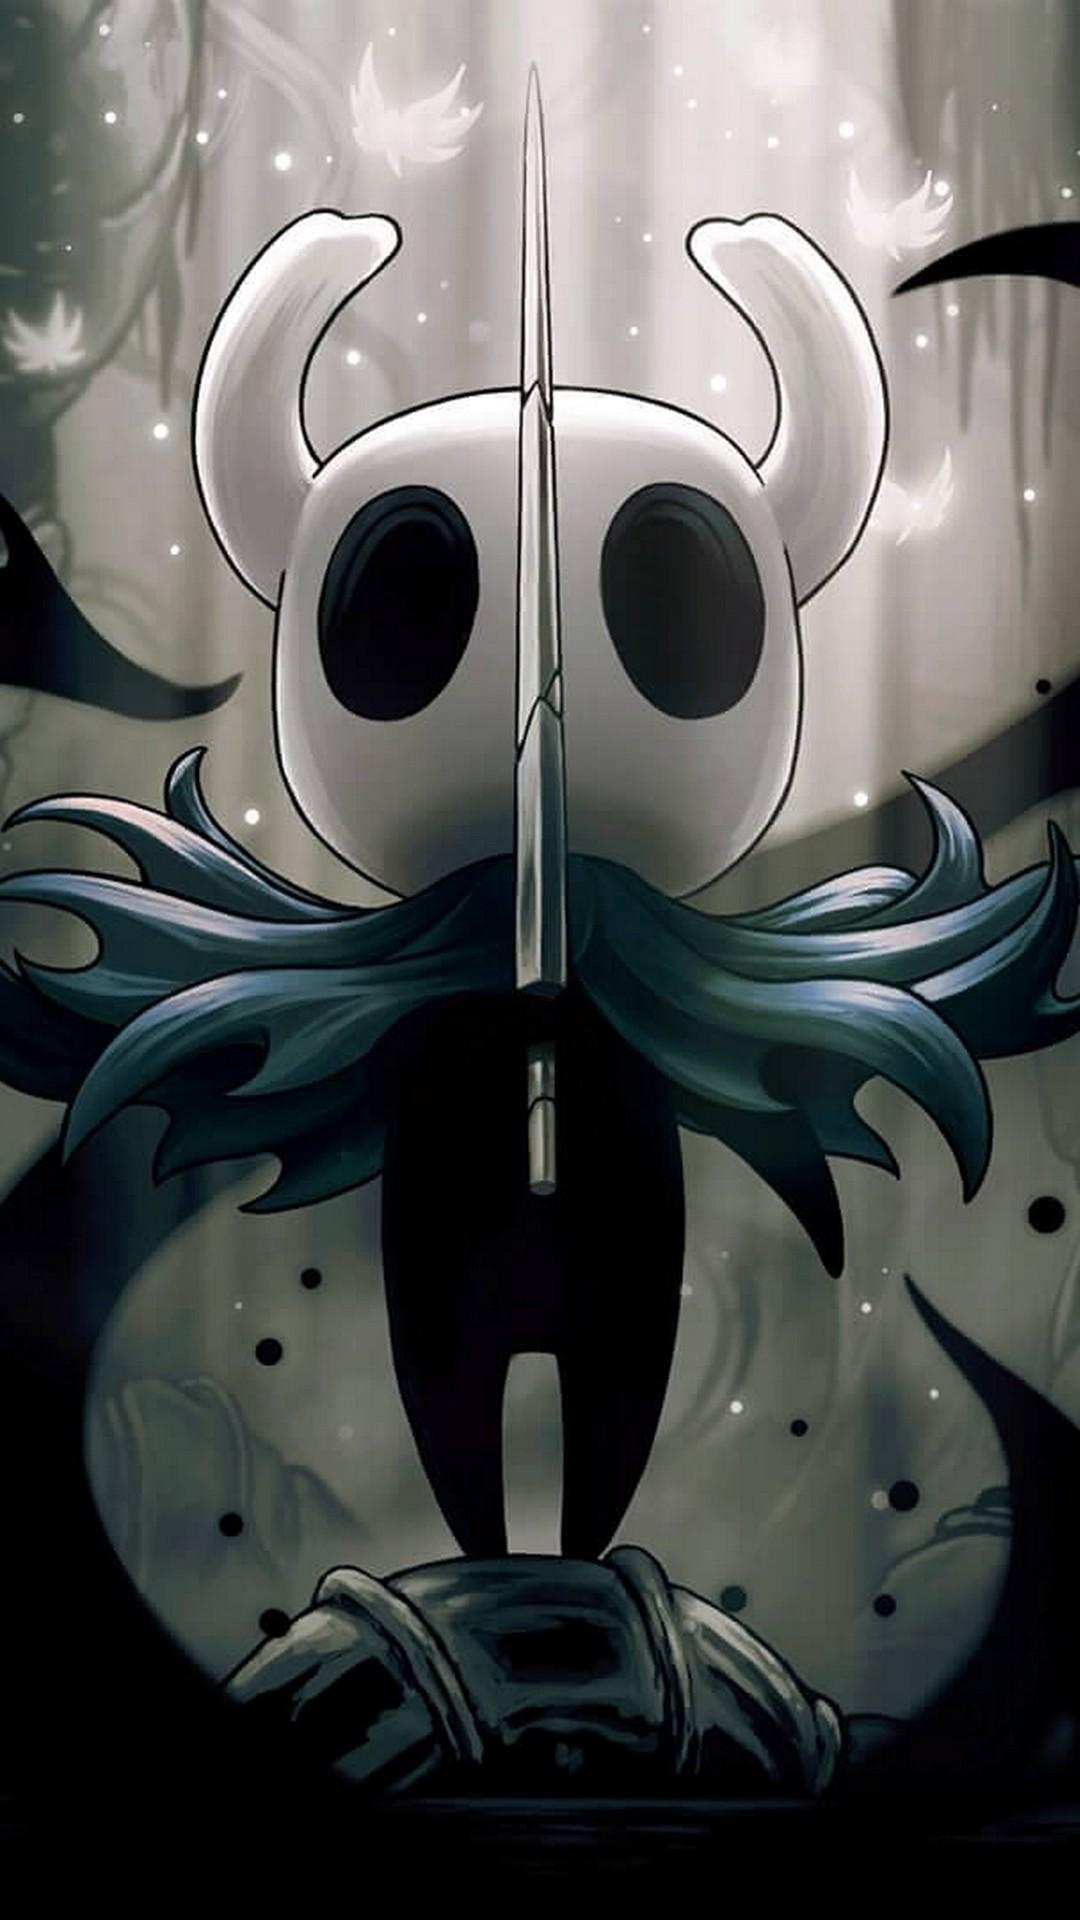 1080 x 1920 · jpeg - Hollow Knight Wallpaper For Android - 2021 Android Wallpapers